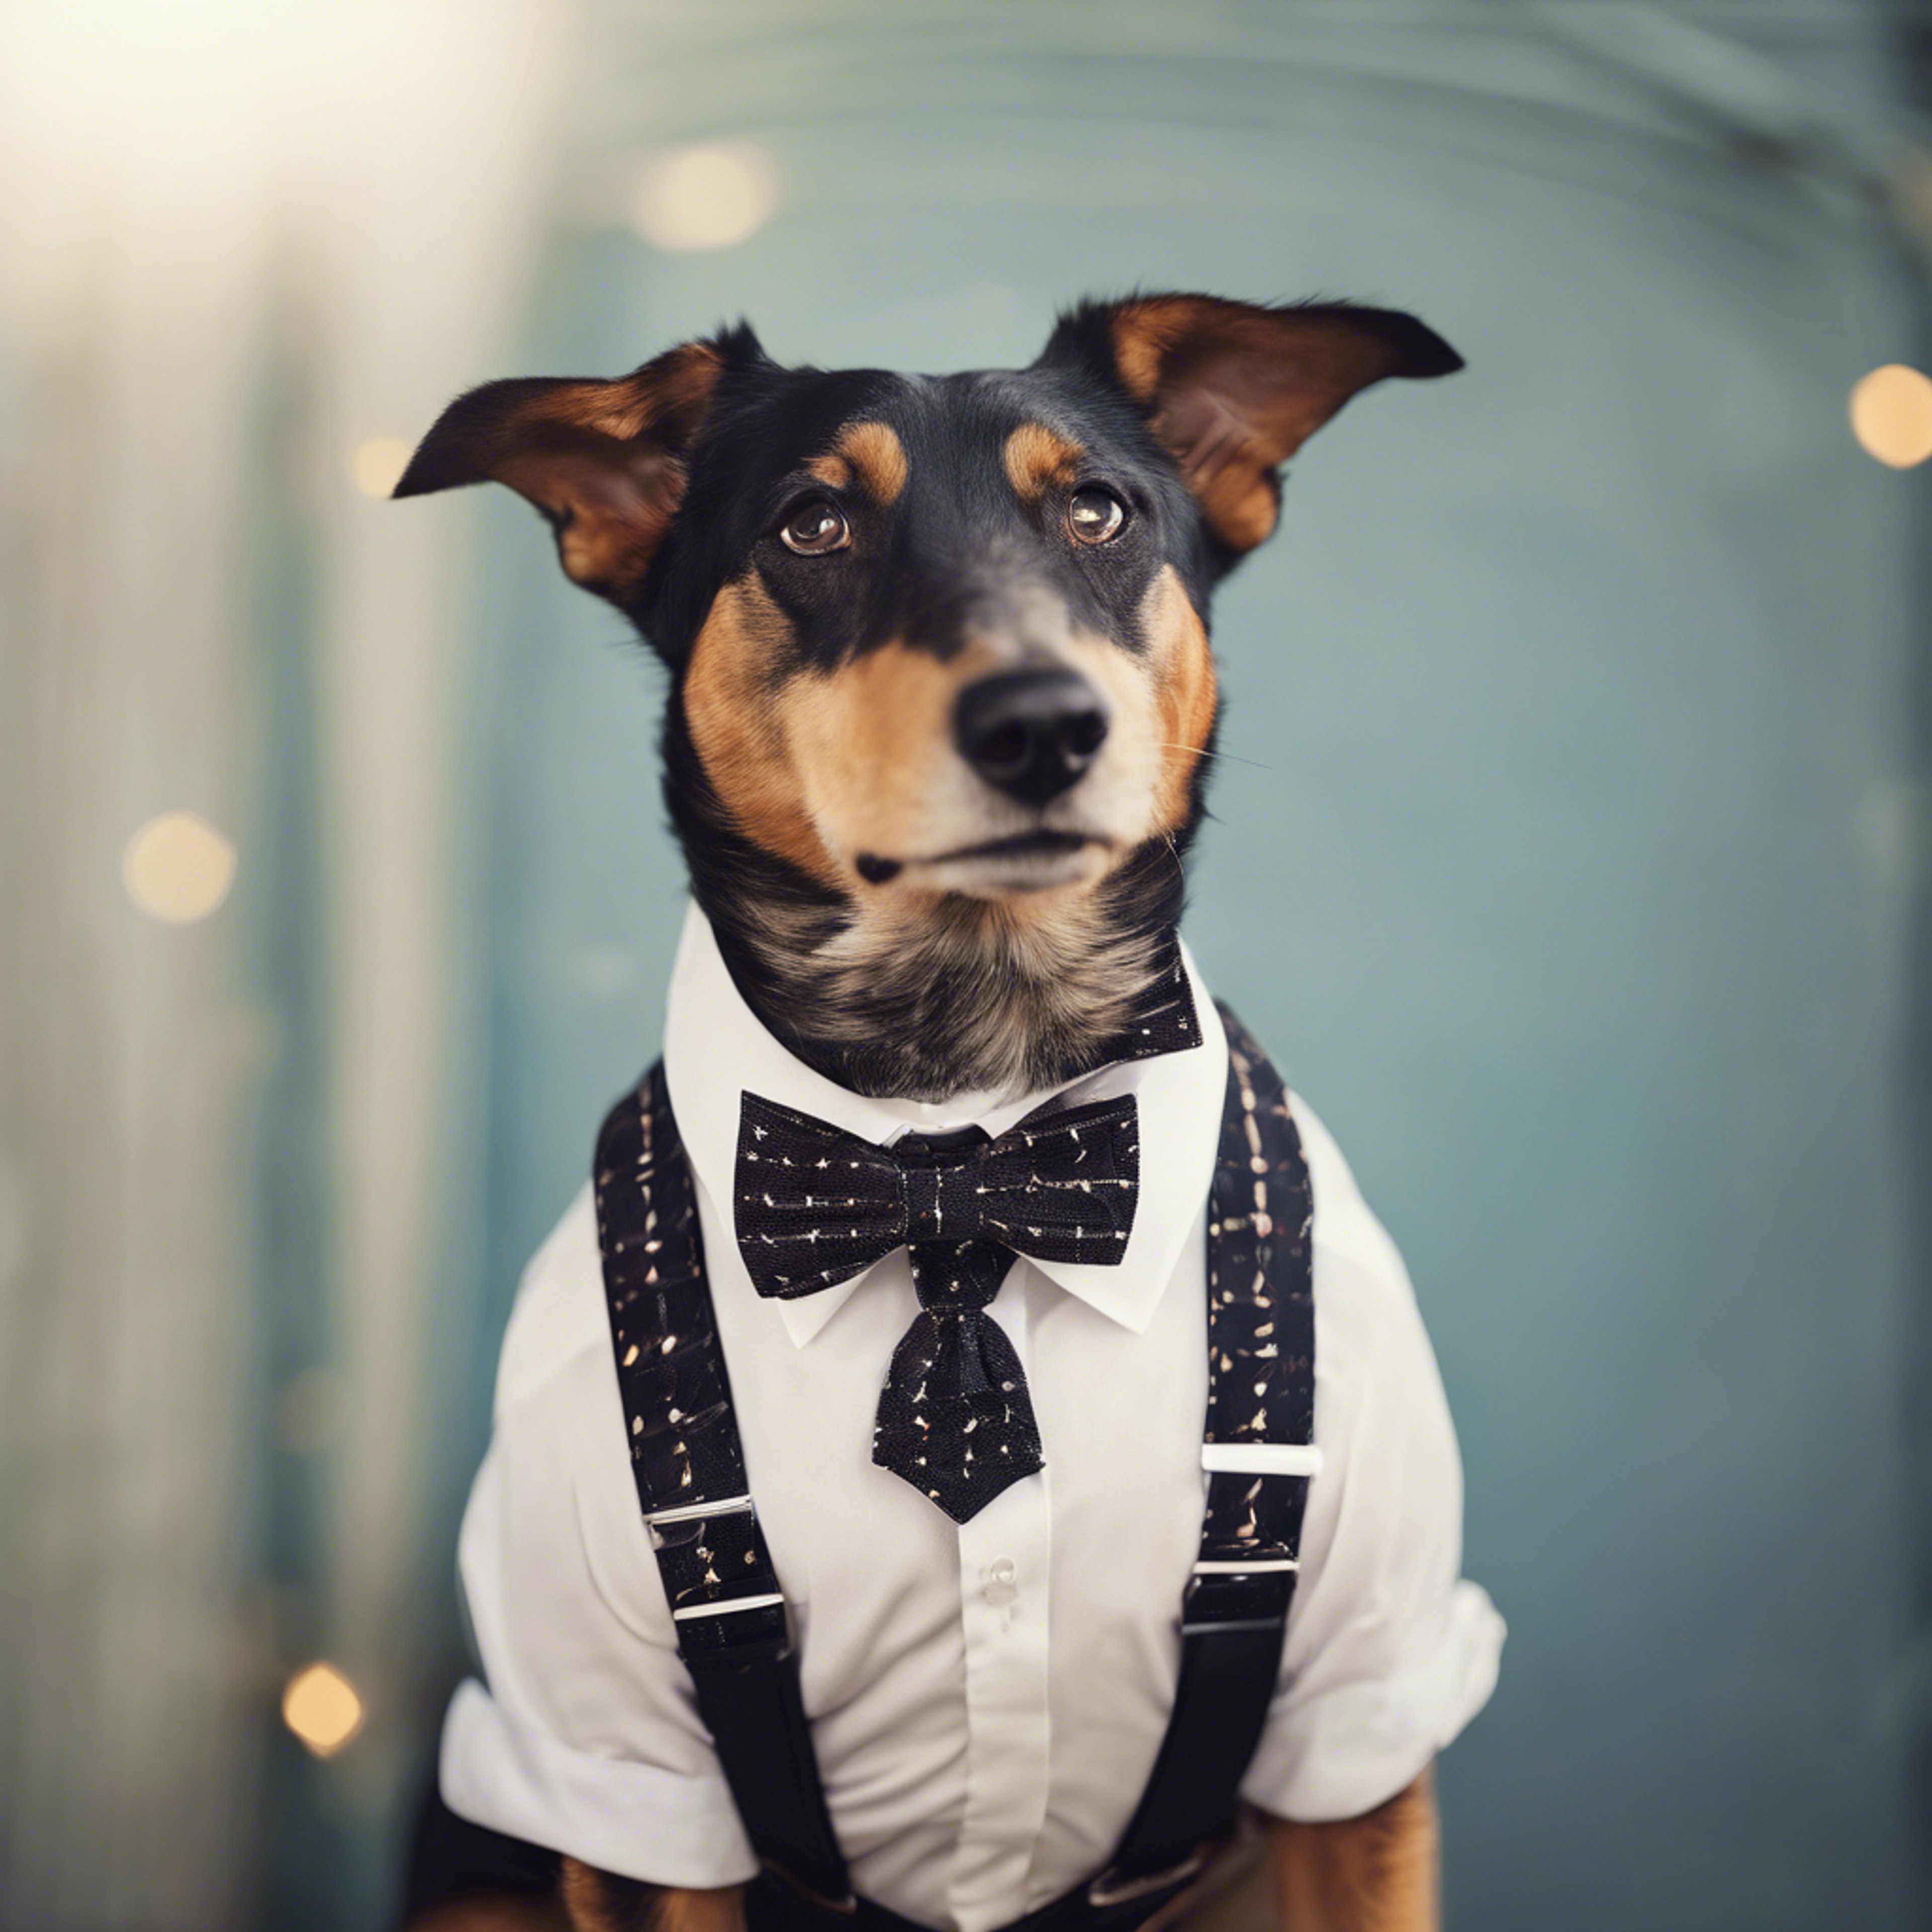 A dapper dog dressed in a cute retro-style outfit, featuring suspenders and bow tie. ورق الجدران[69a1531fb80543609416]